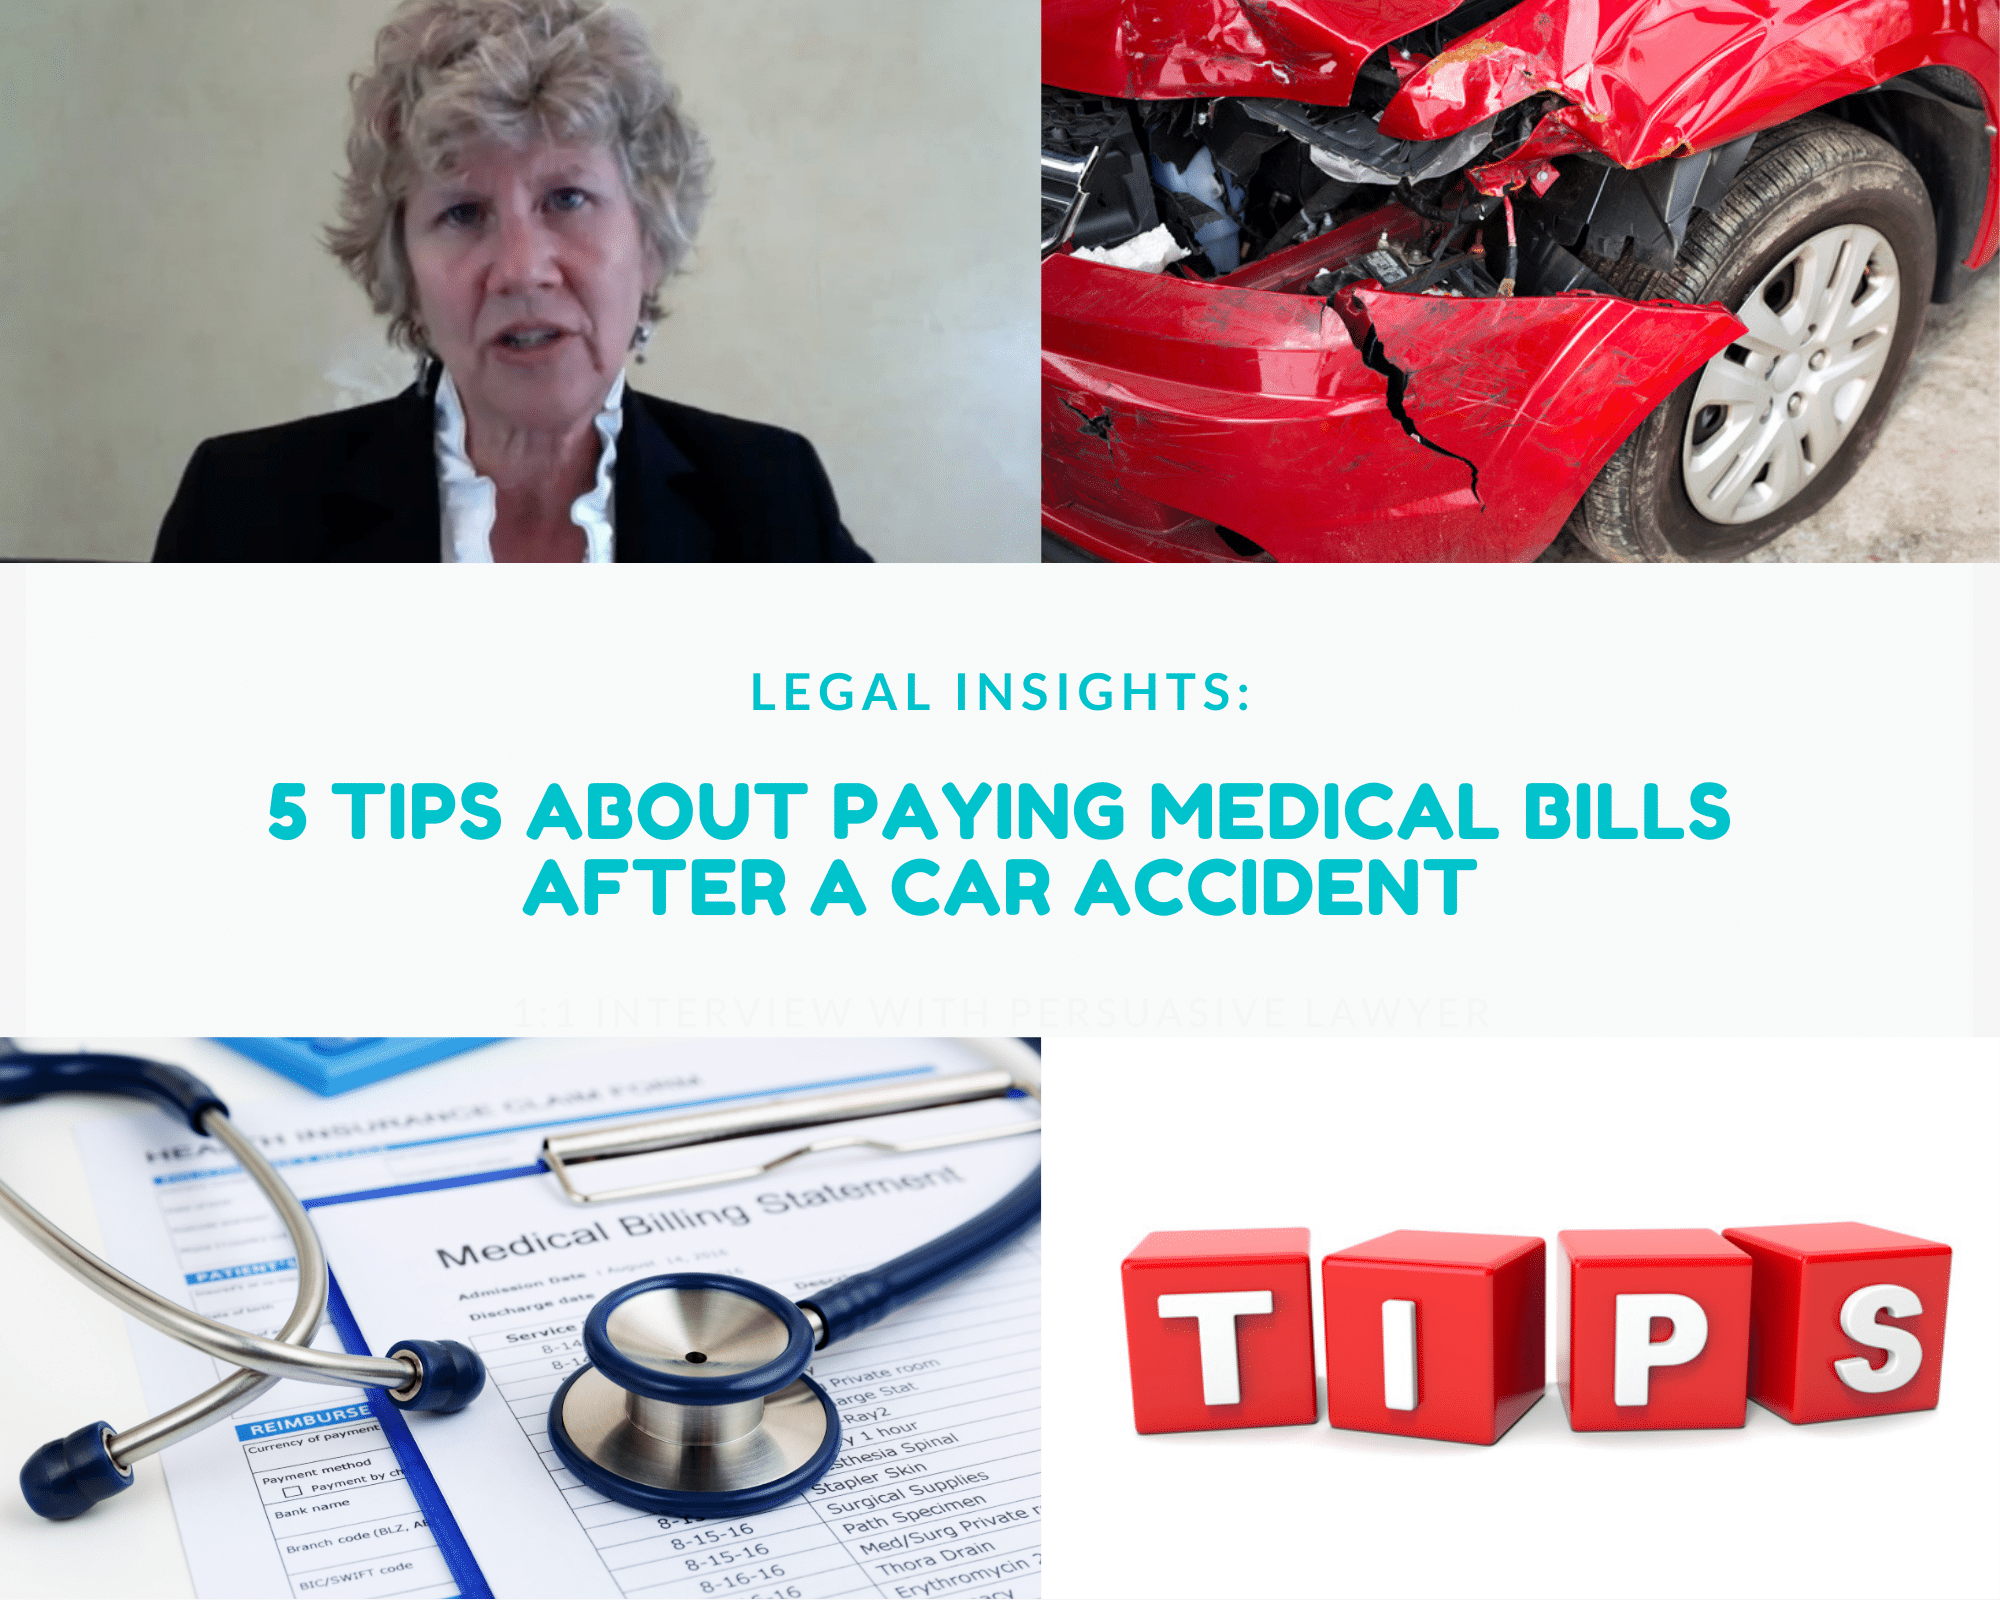 5 tips about paying medical bills after a car accident